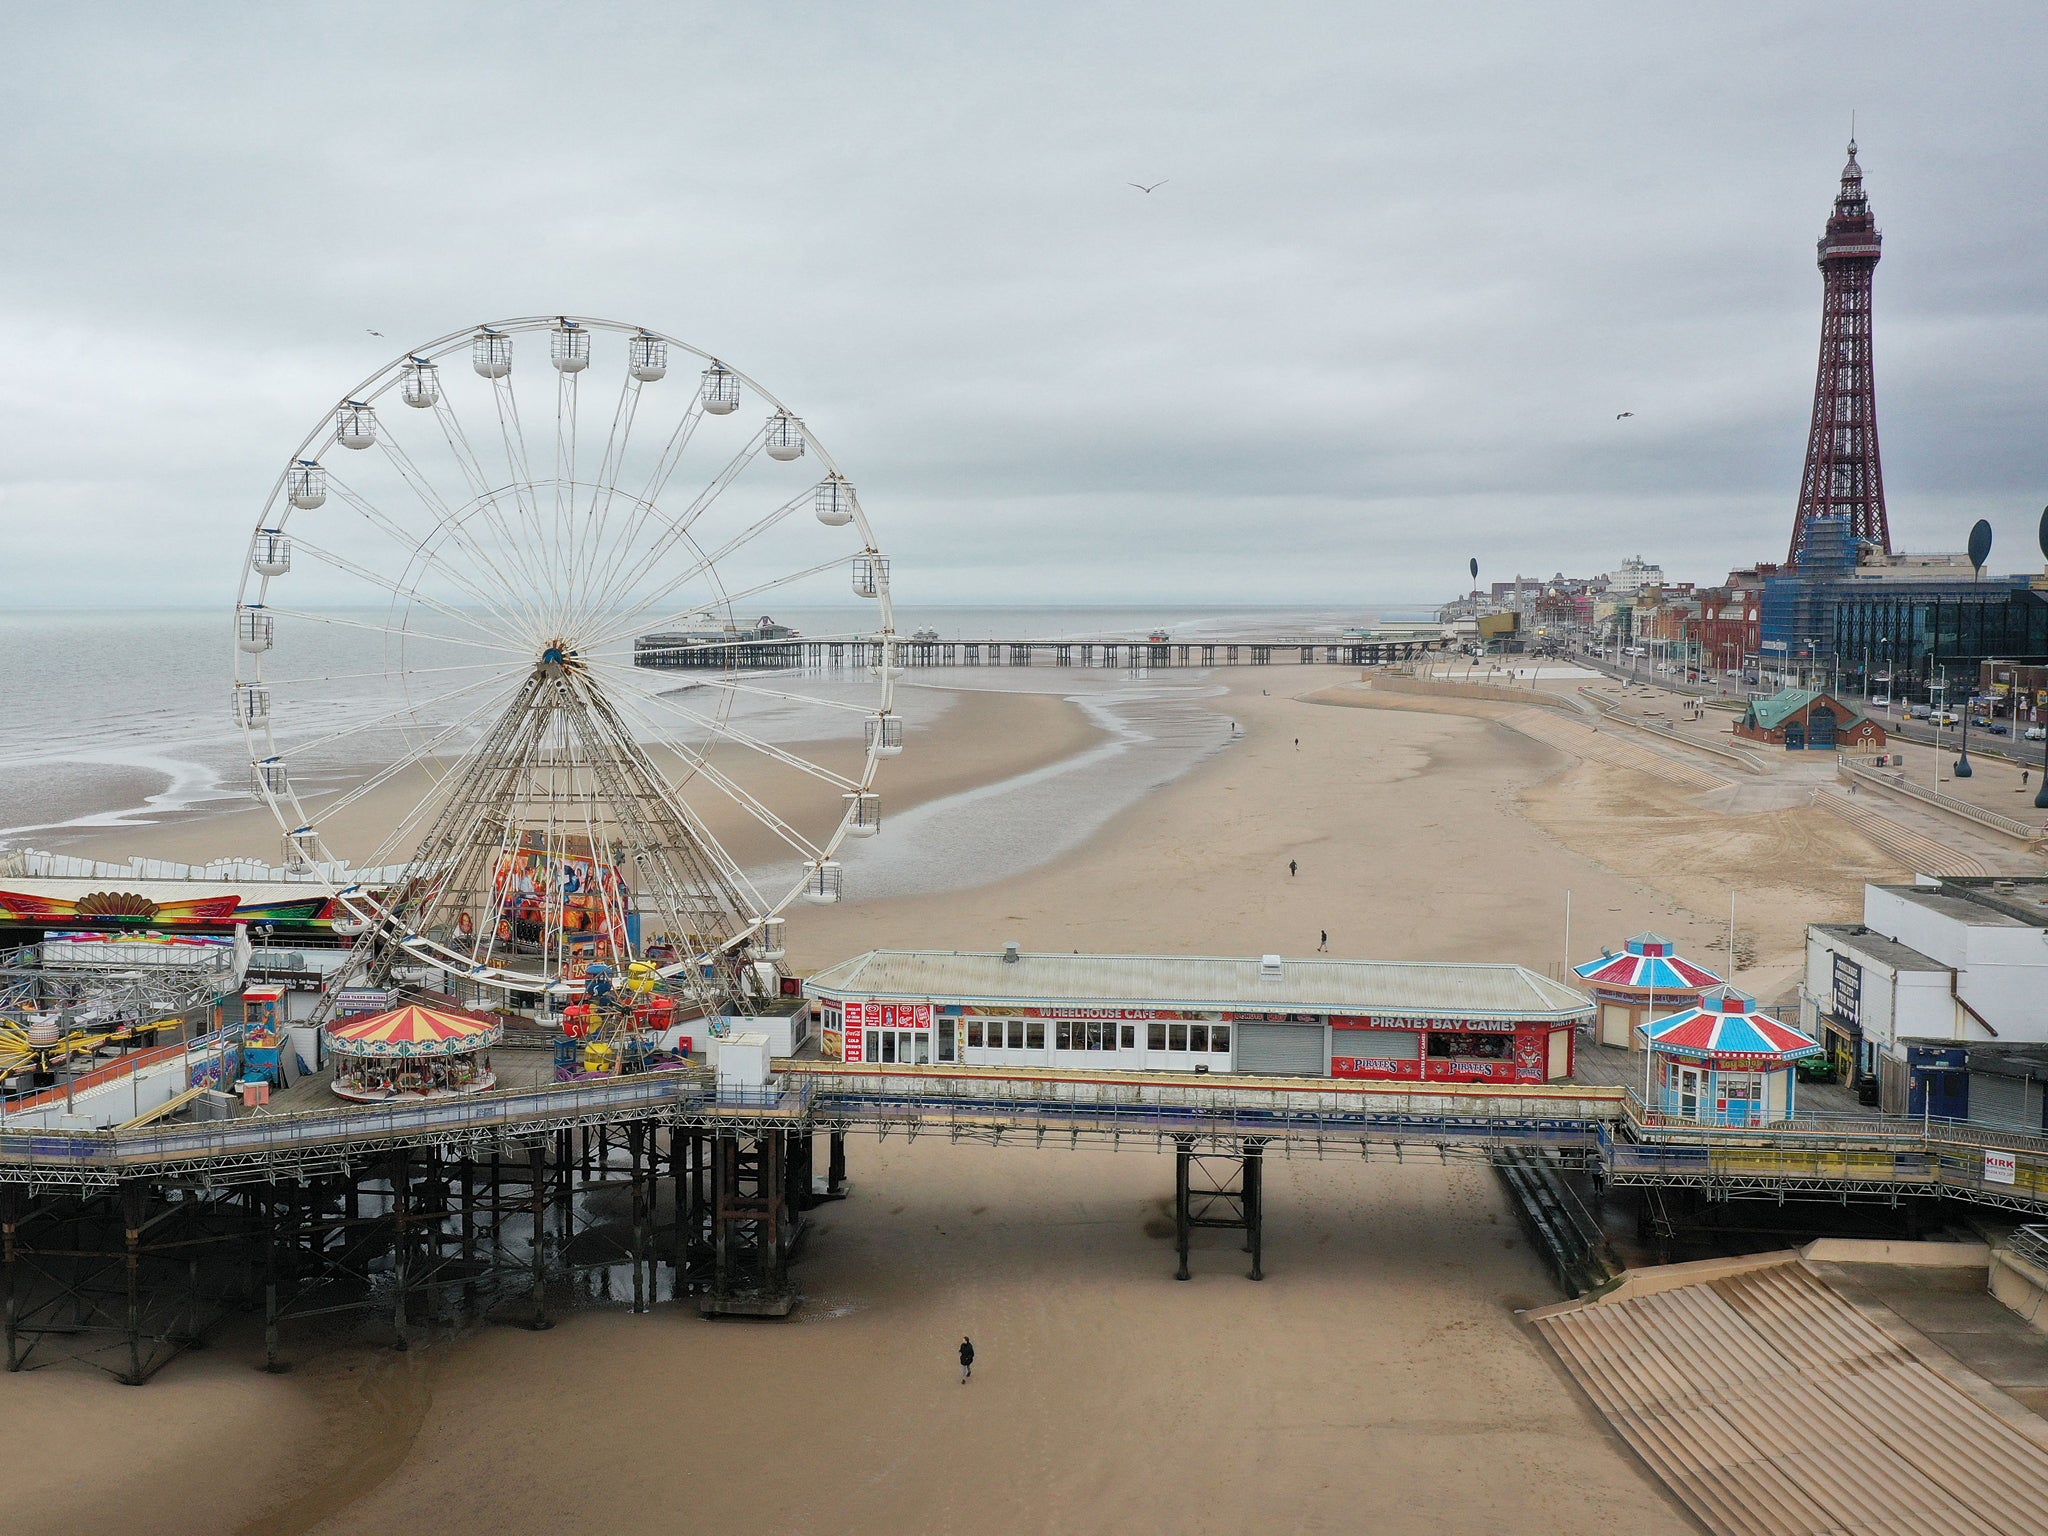 Pier pressure: behind the seaside fun, Blackpool is a byword for Britain’s social ills